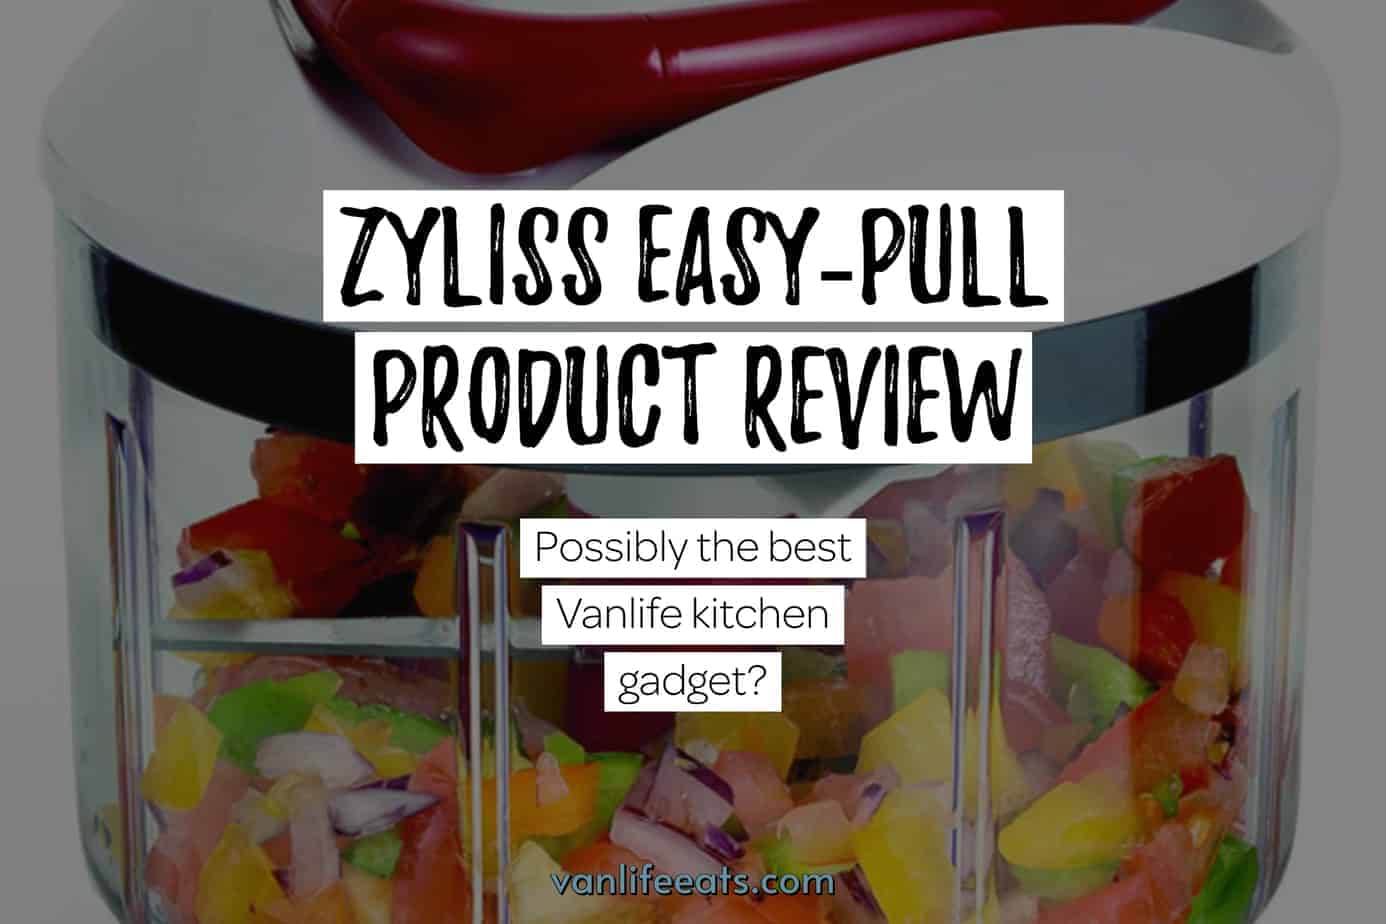 https://vanlifeeats.com/wp-content/uploads/2020/10/zyliss-easy-pull-product-review.jpg